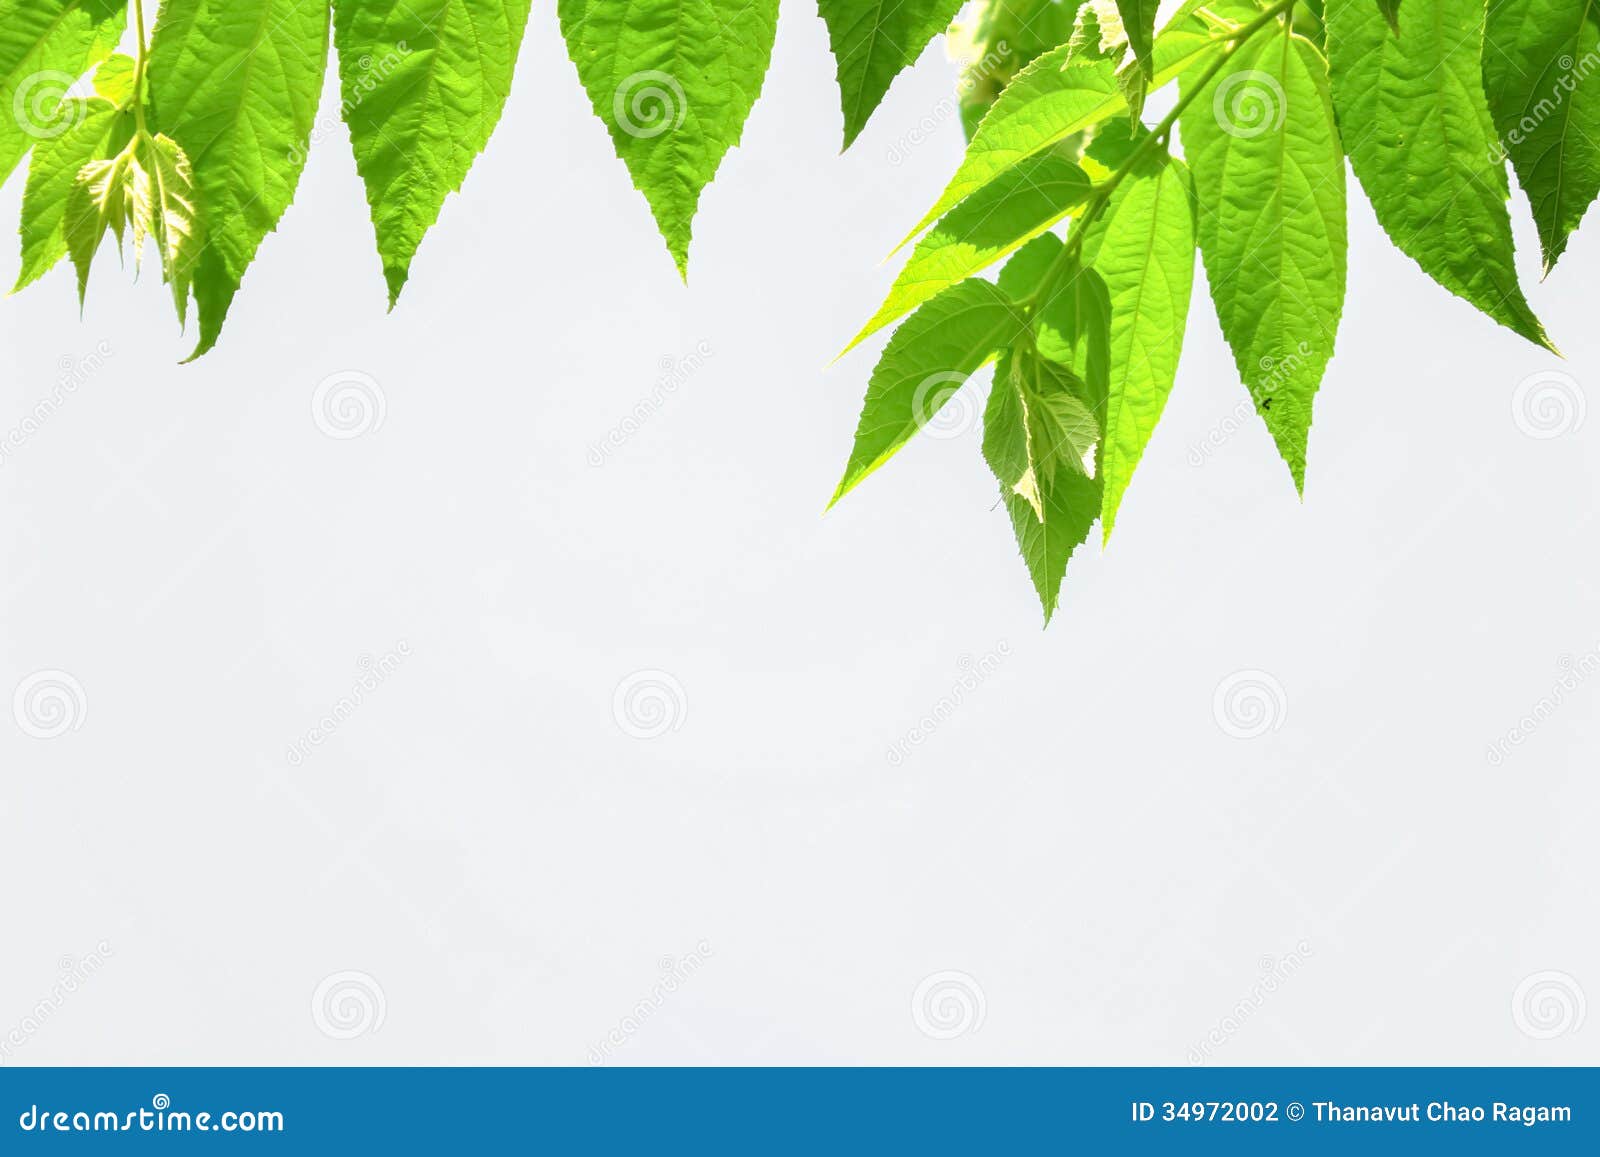 Leaves with White Background Stock Photo - Image of foliage, leaves